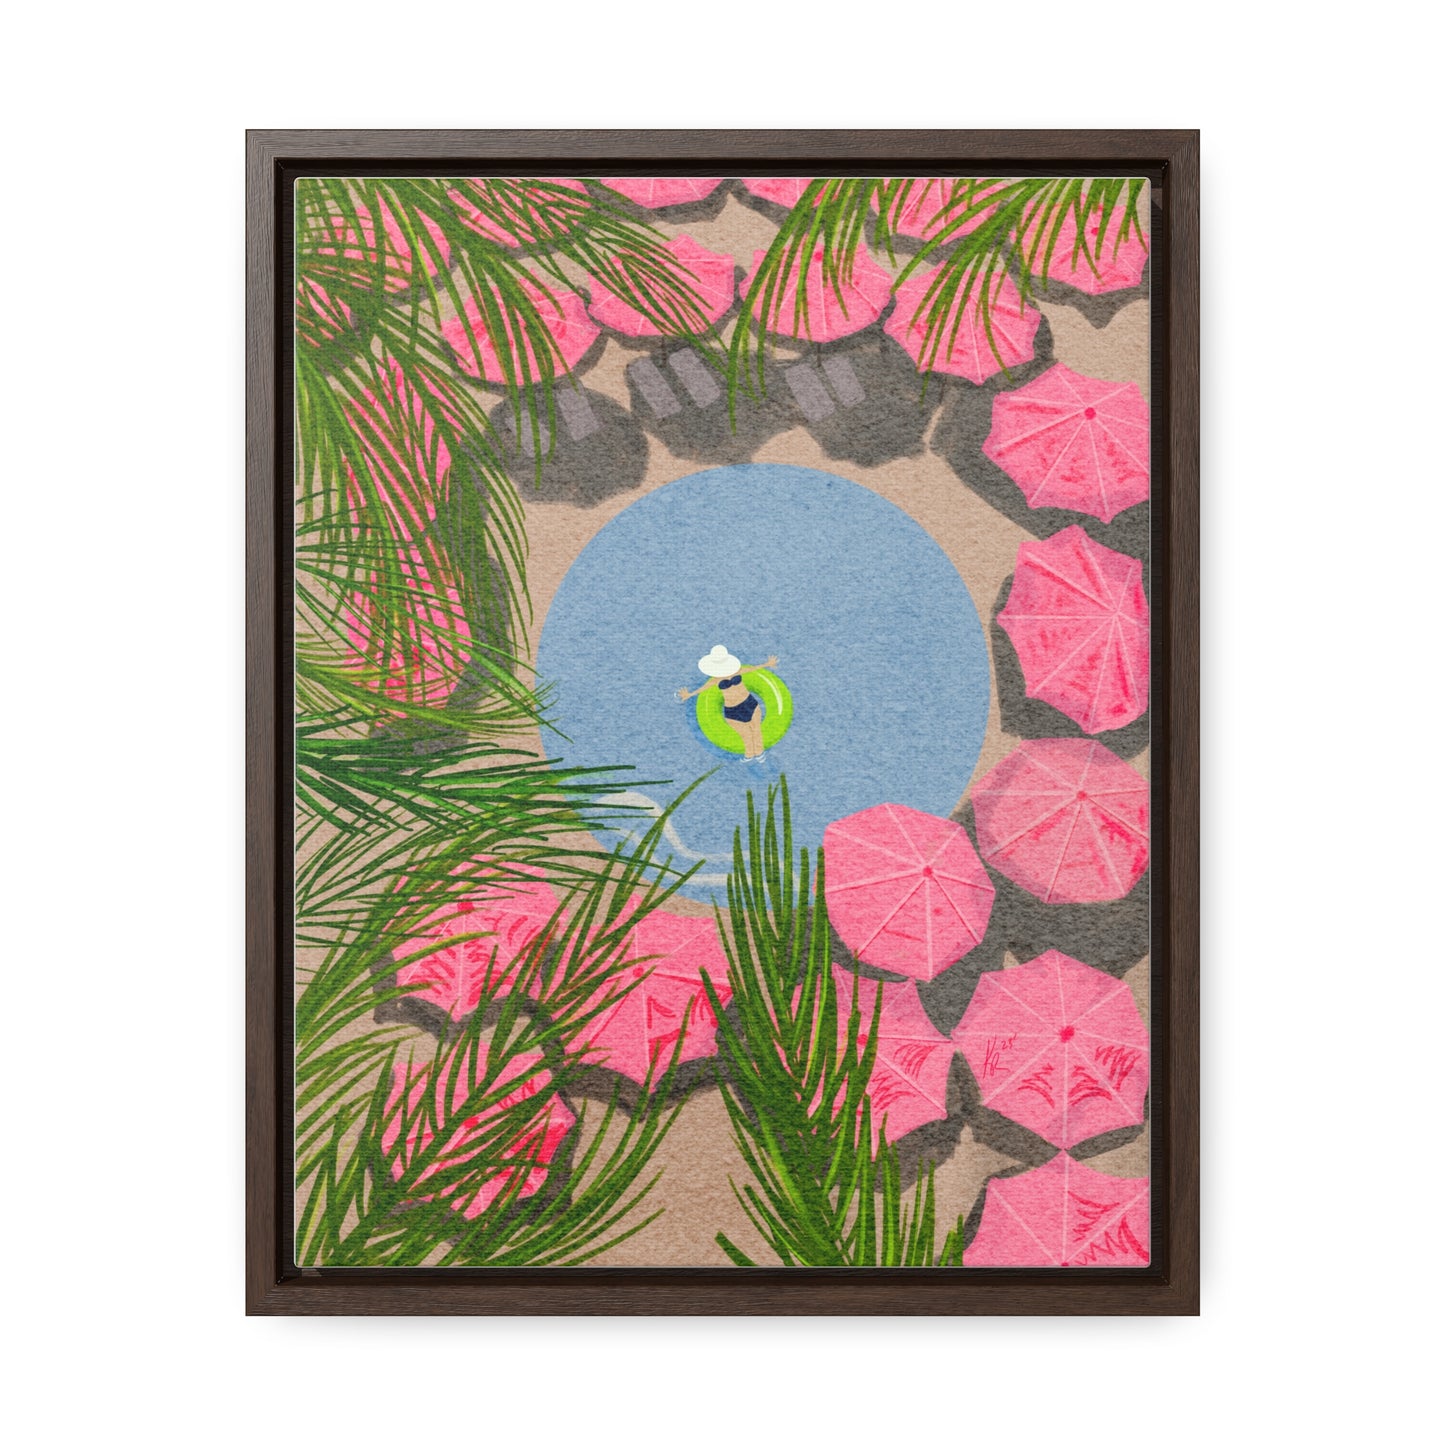 Chill'n Canvas Giclee, Framed